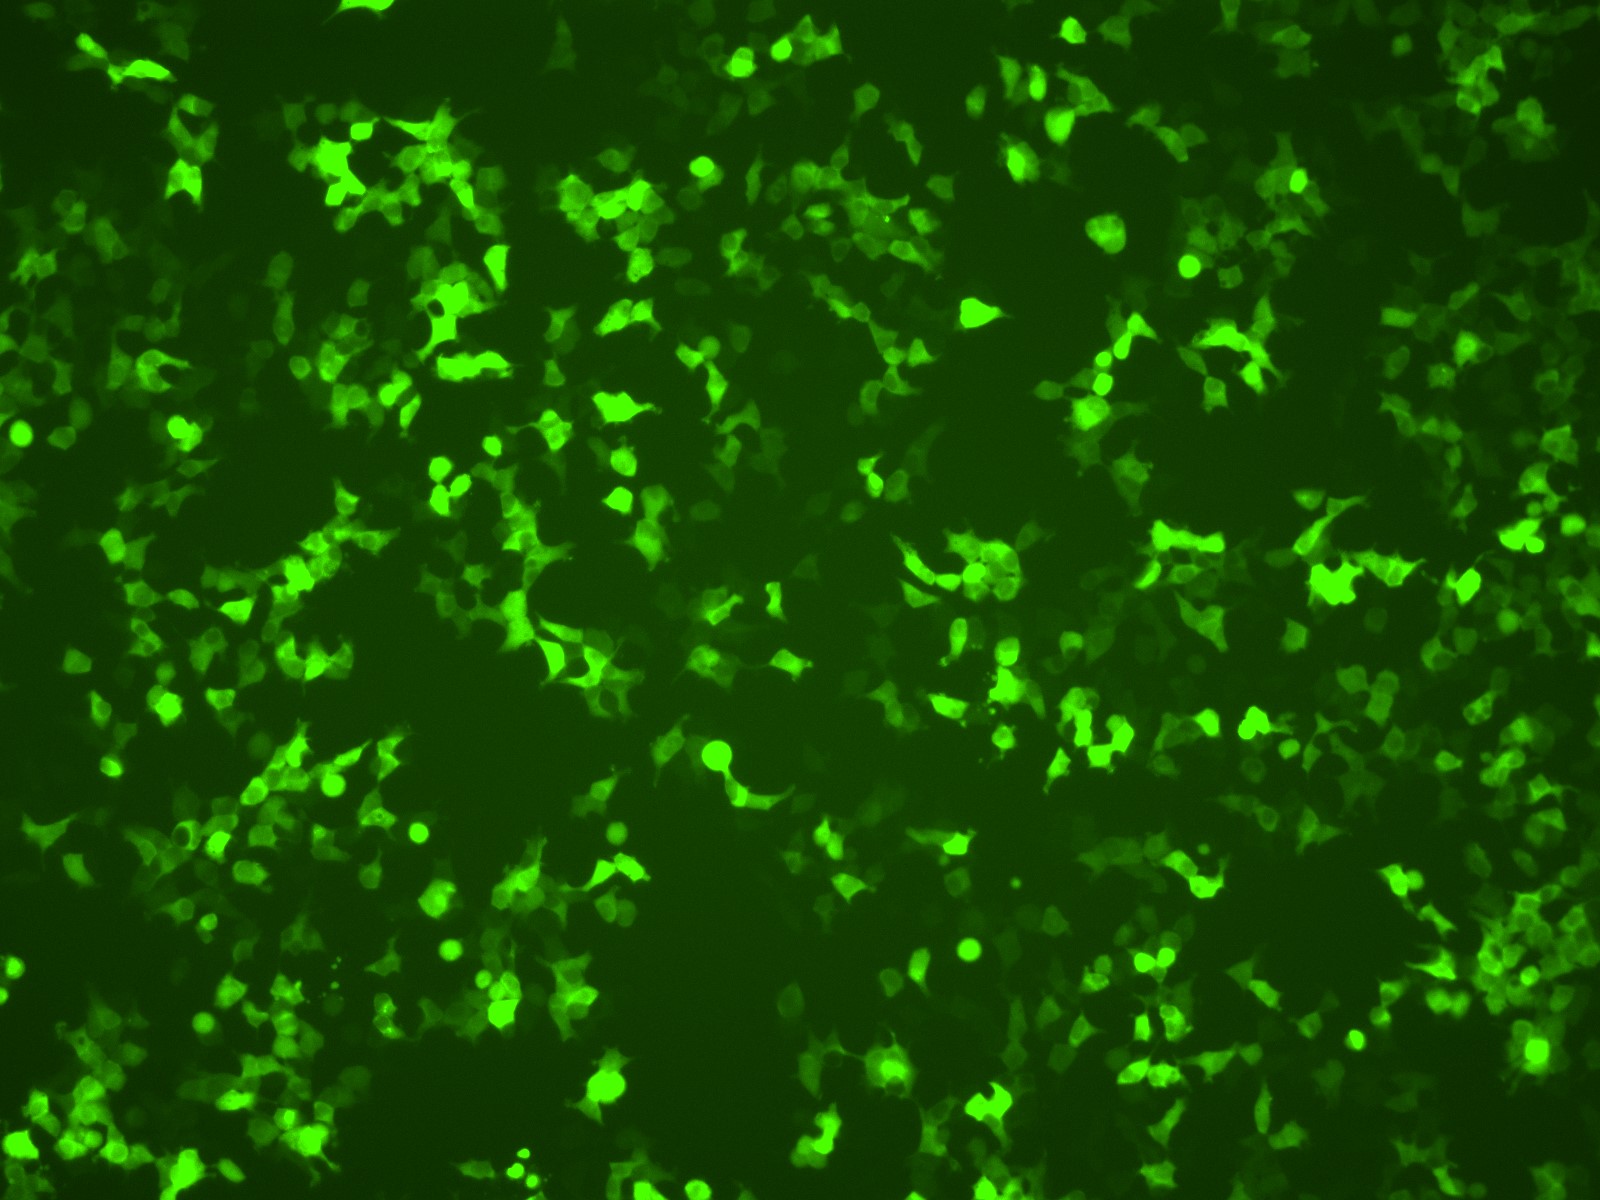 HEK 293T cells transfected with GFP-LUC